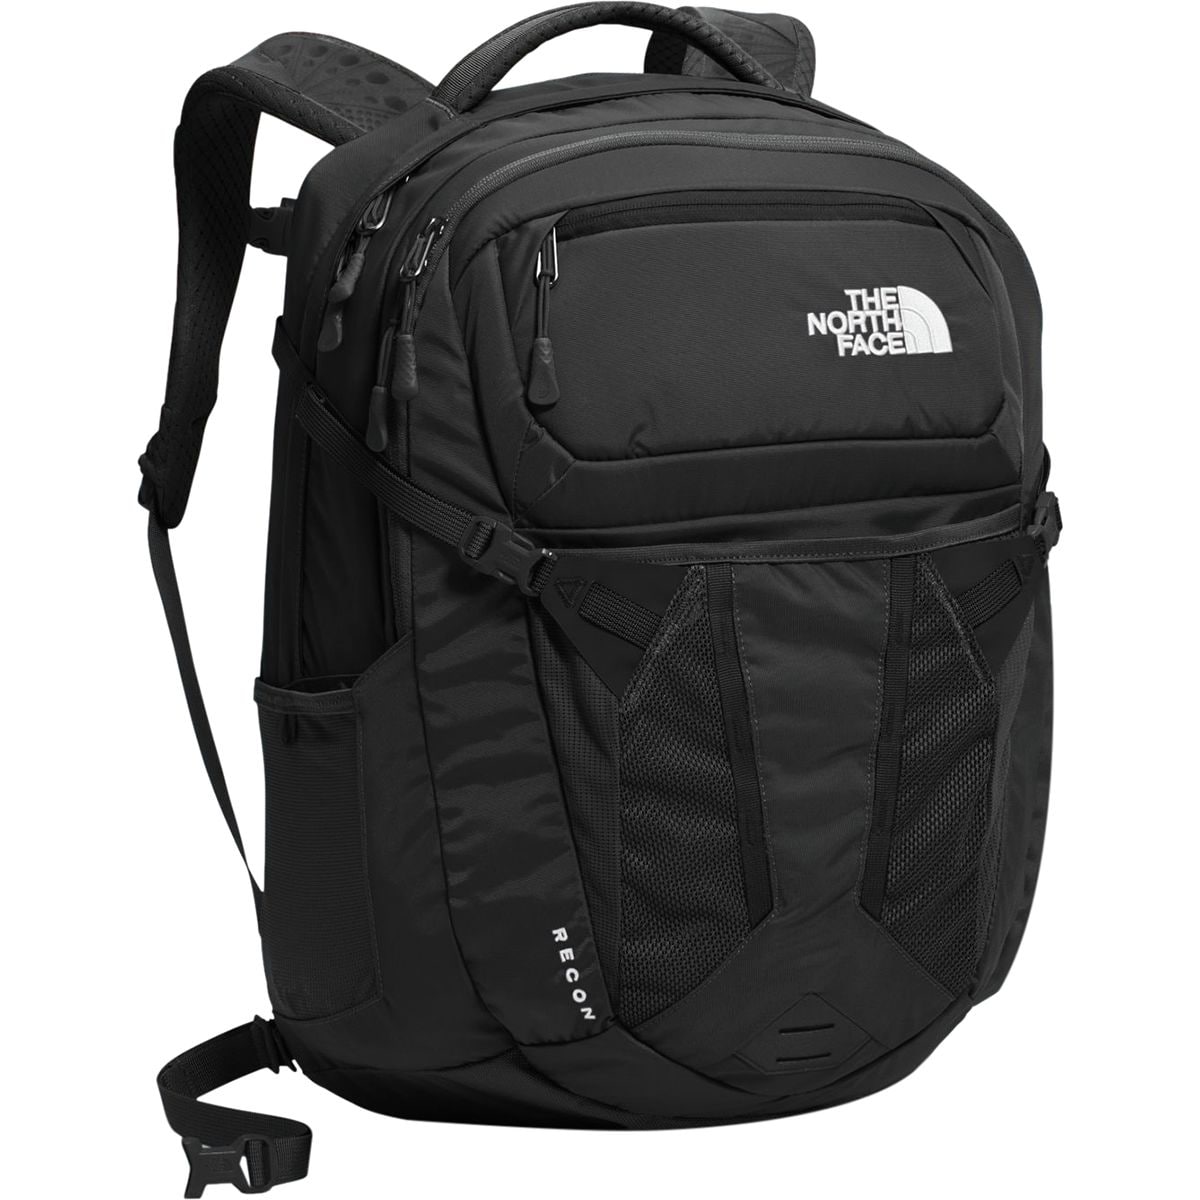 north face women's recon backpack amazon